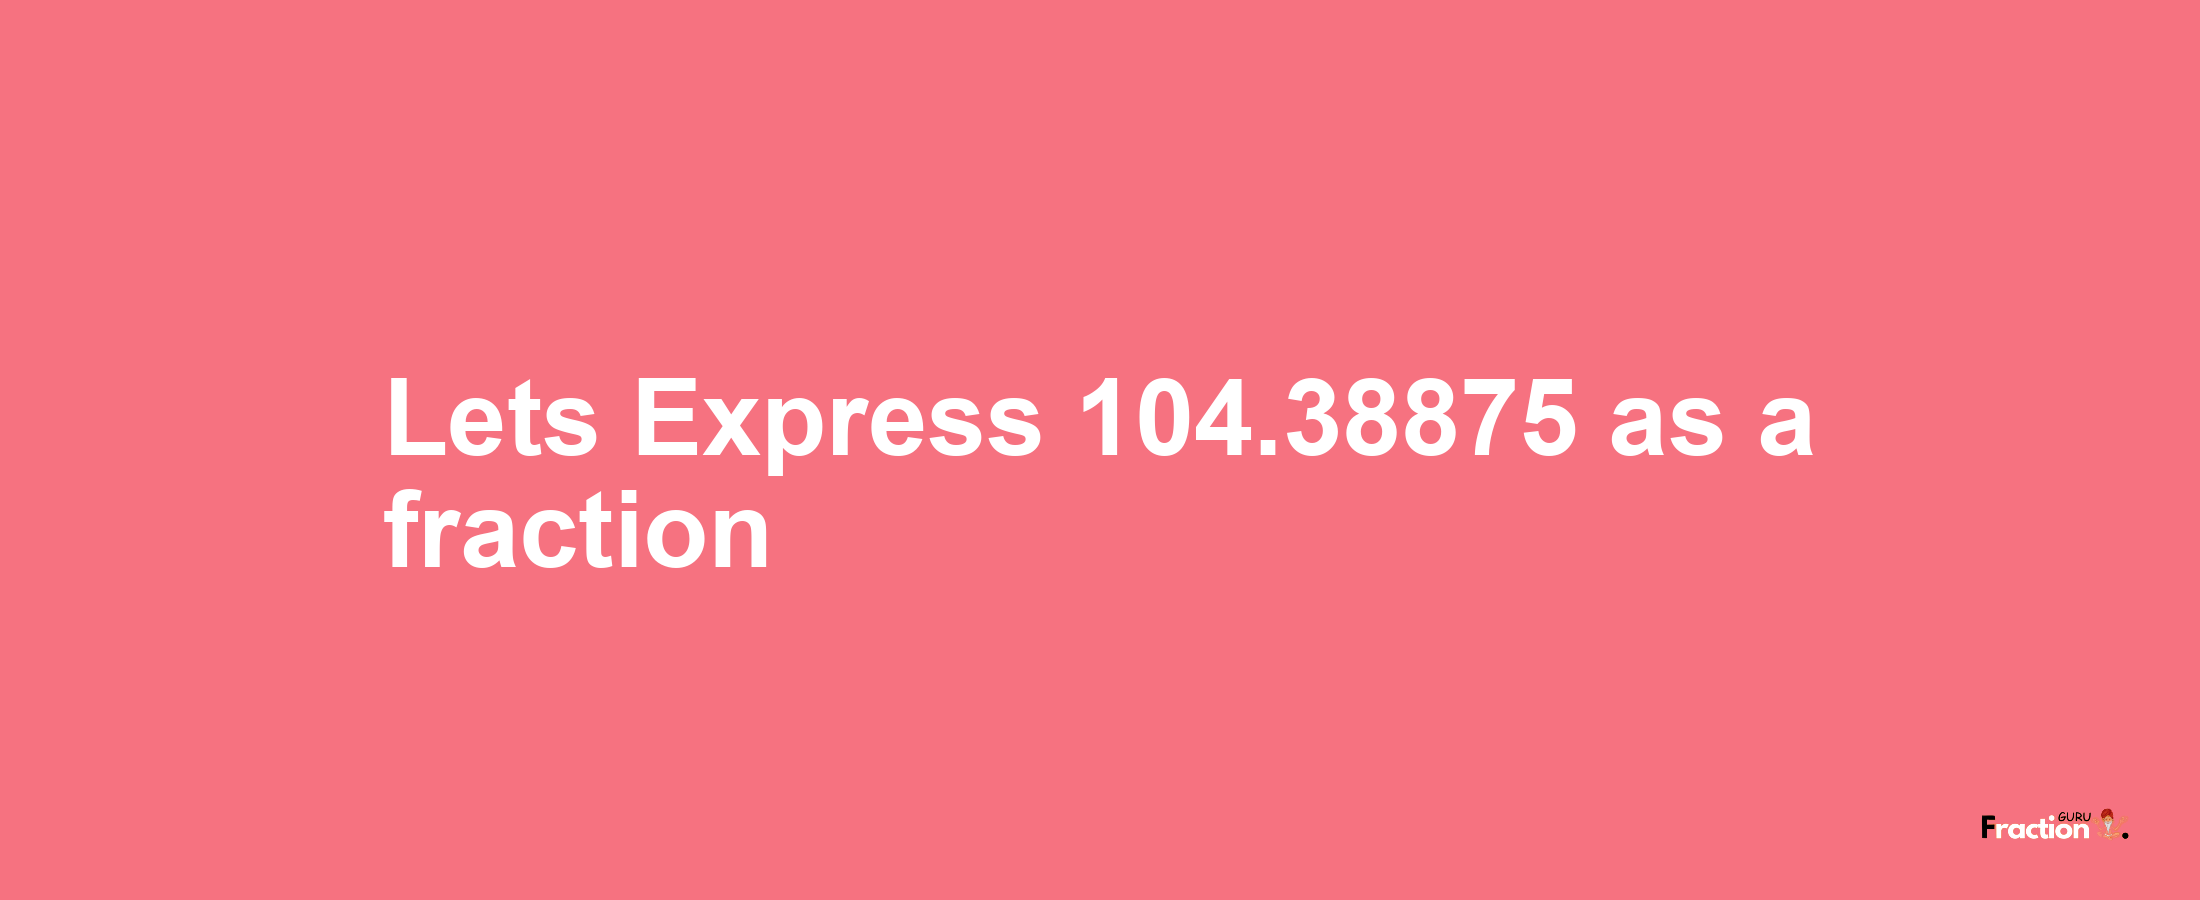 Lets Express 104.38875 as afraction